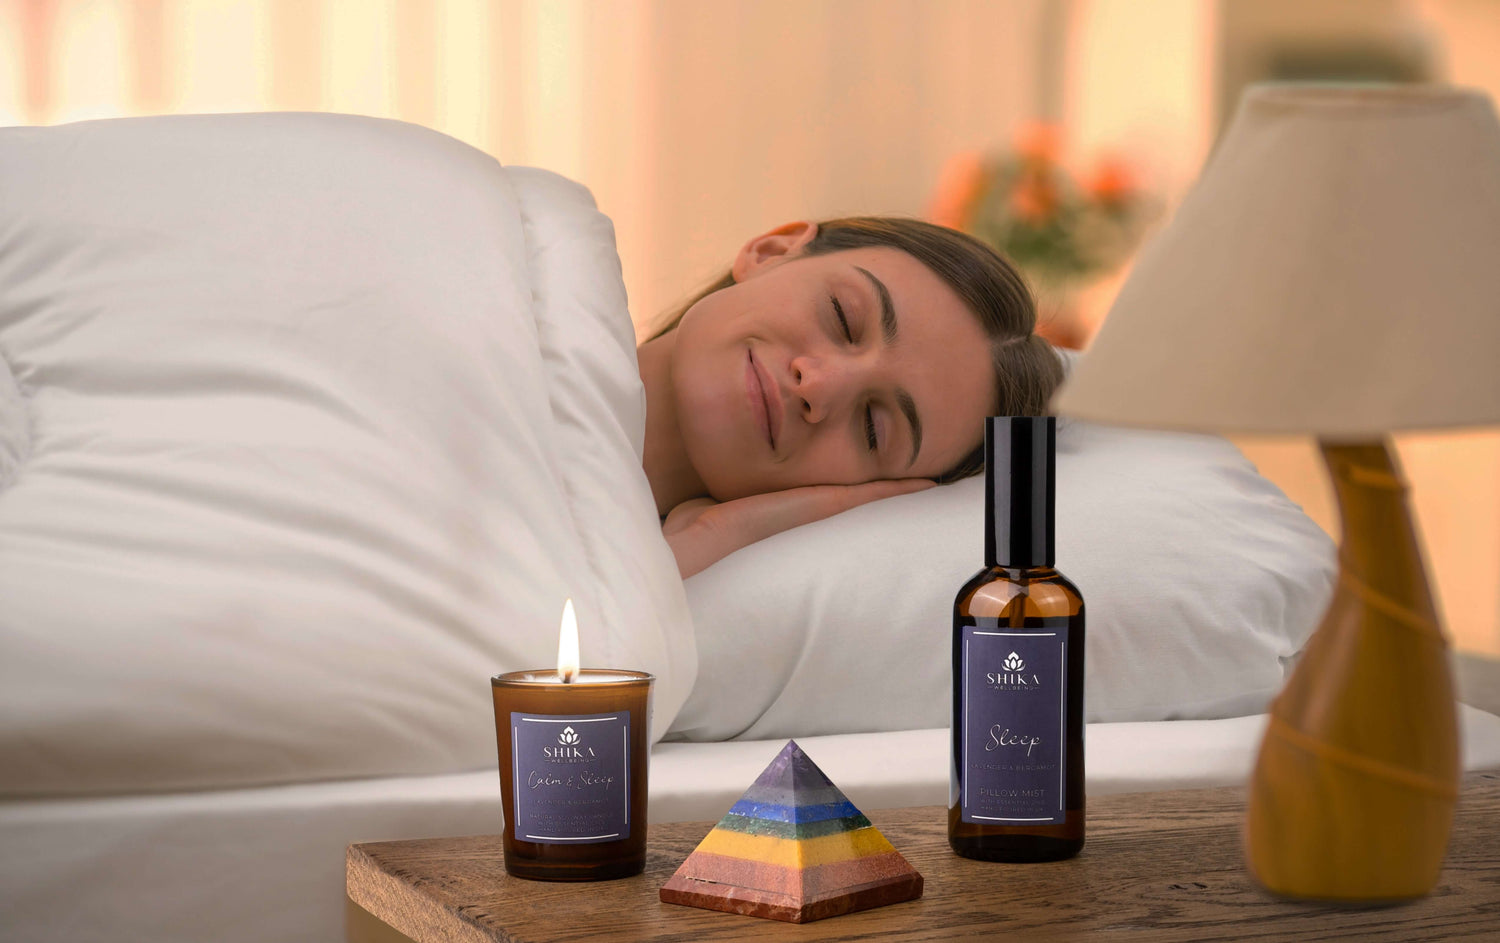 Woman lying in bed with her eye closed. There is a bedside table with the Shika Wellbeing Sleep gift set products on there and a lamp. The products are a bottle of sleep spray, a sleep candle and a pyramid crystal